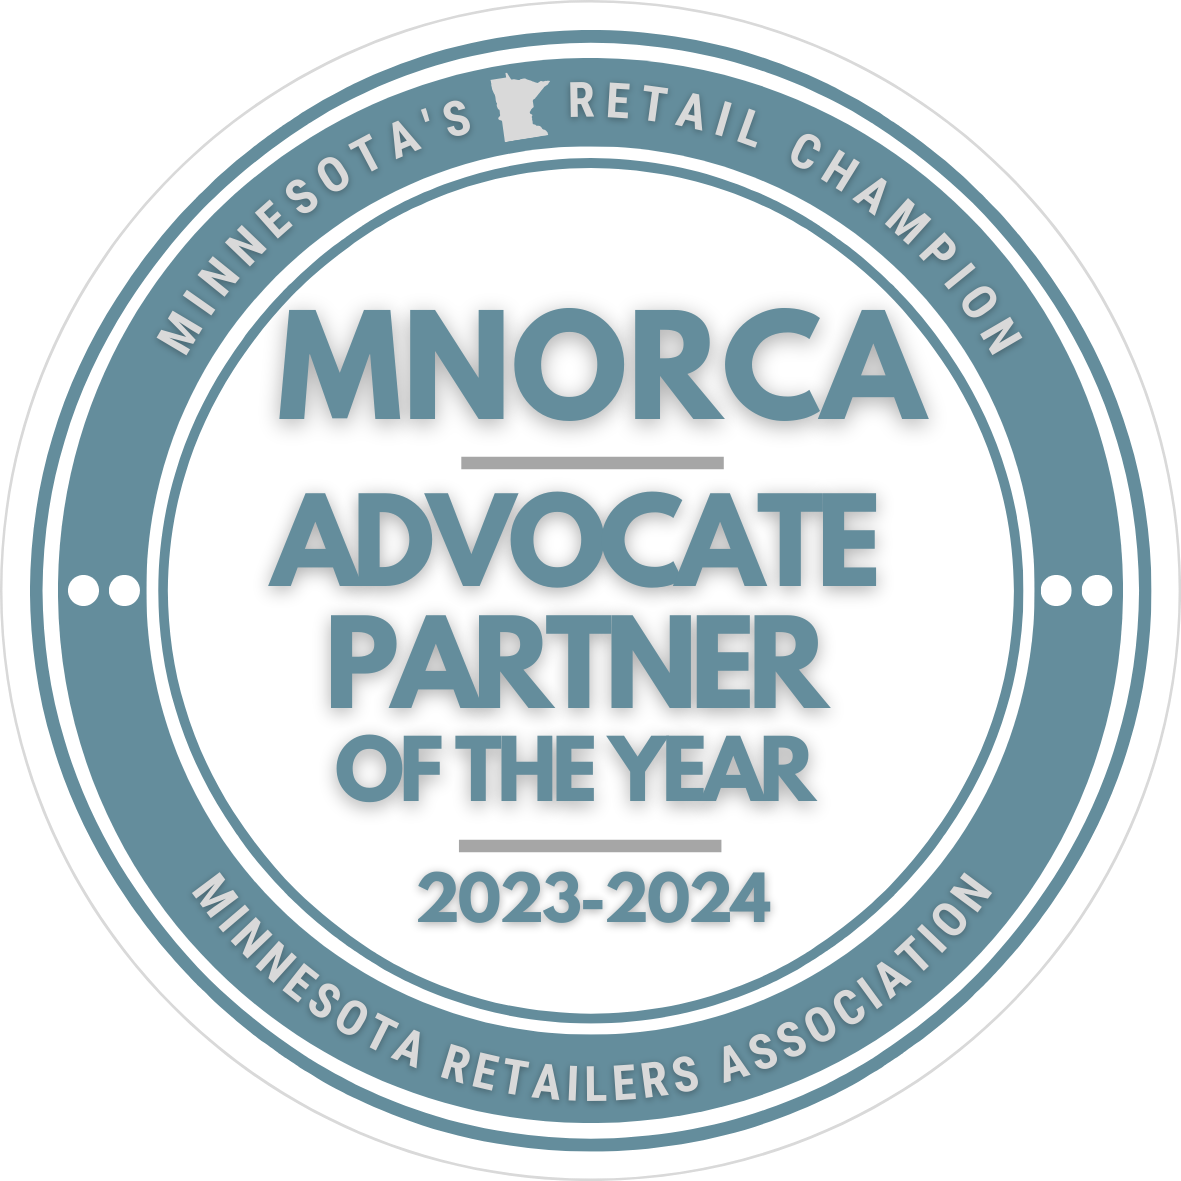 MNORCA Advocate Partner Of The Year